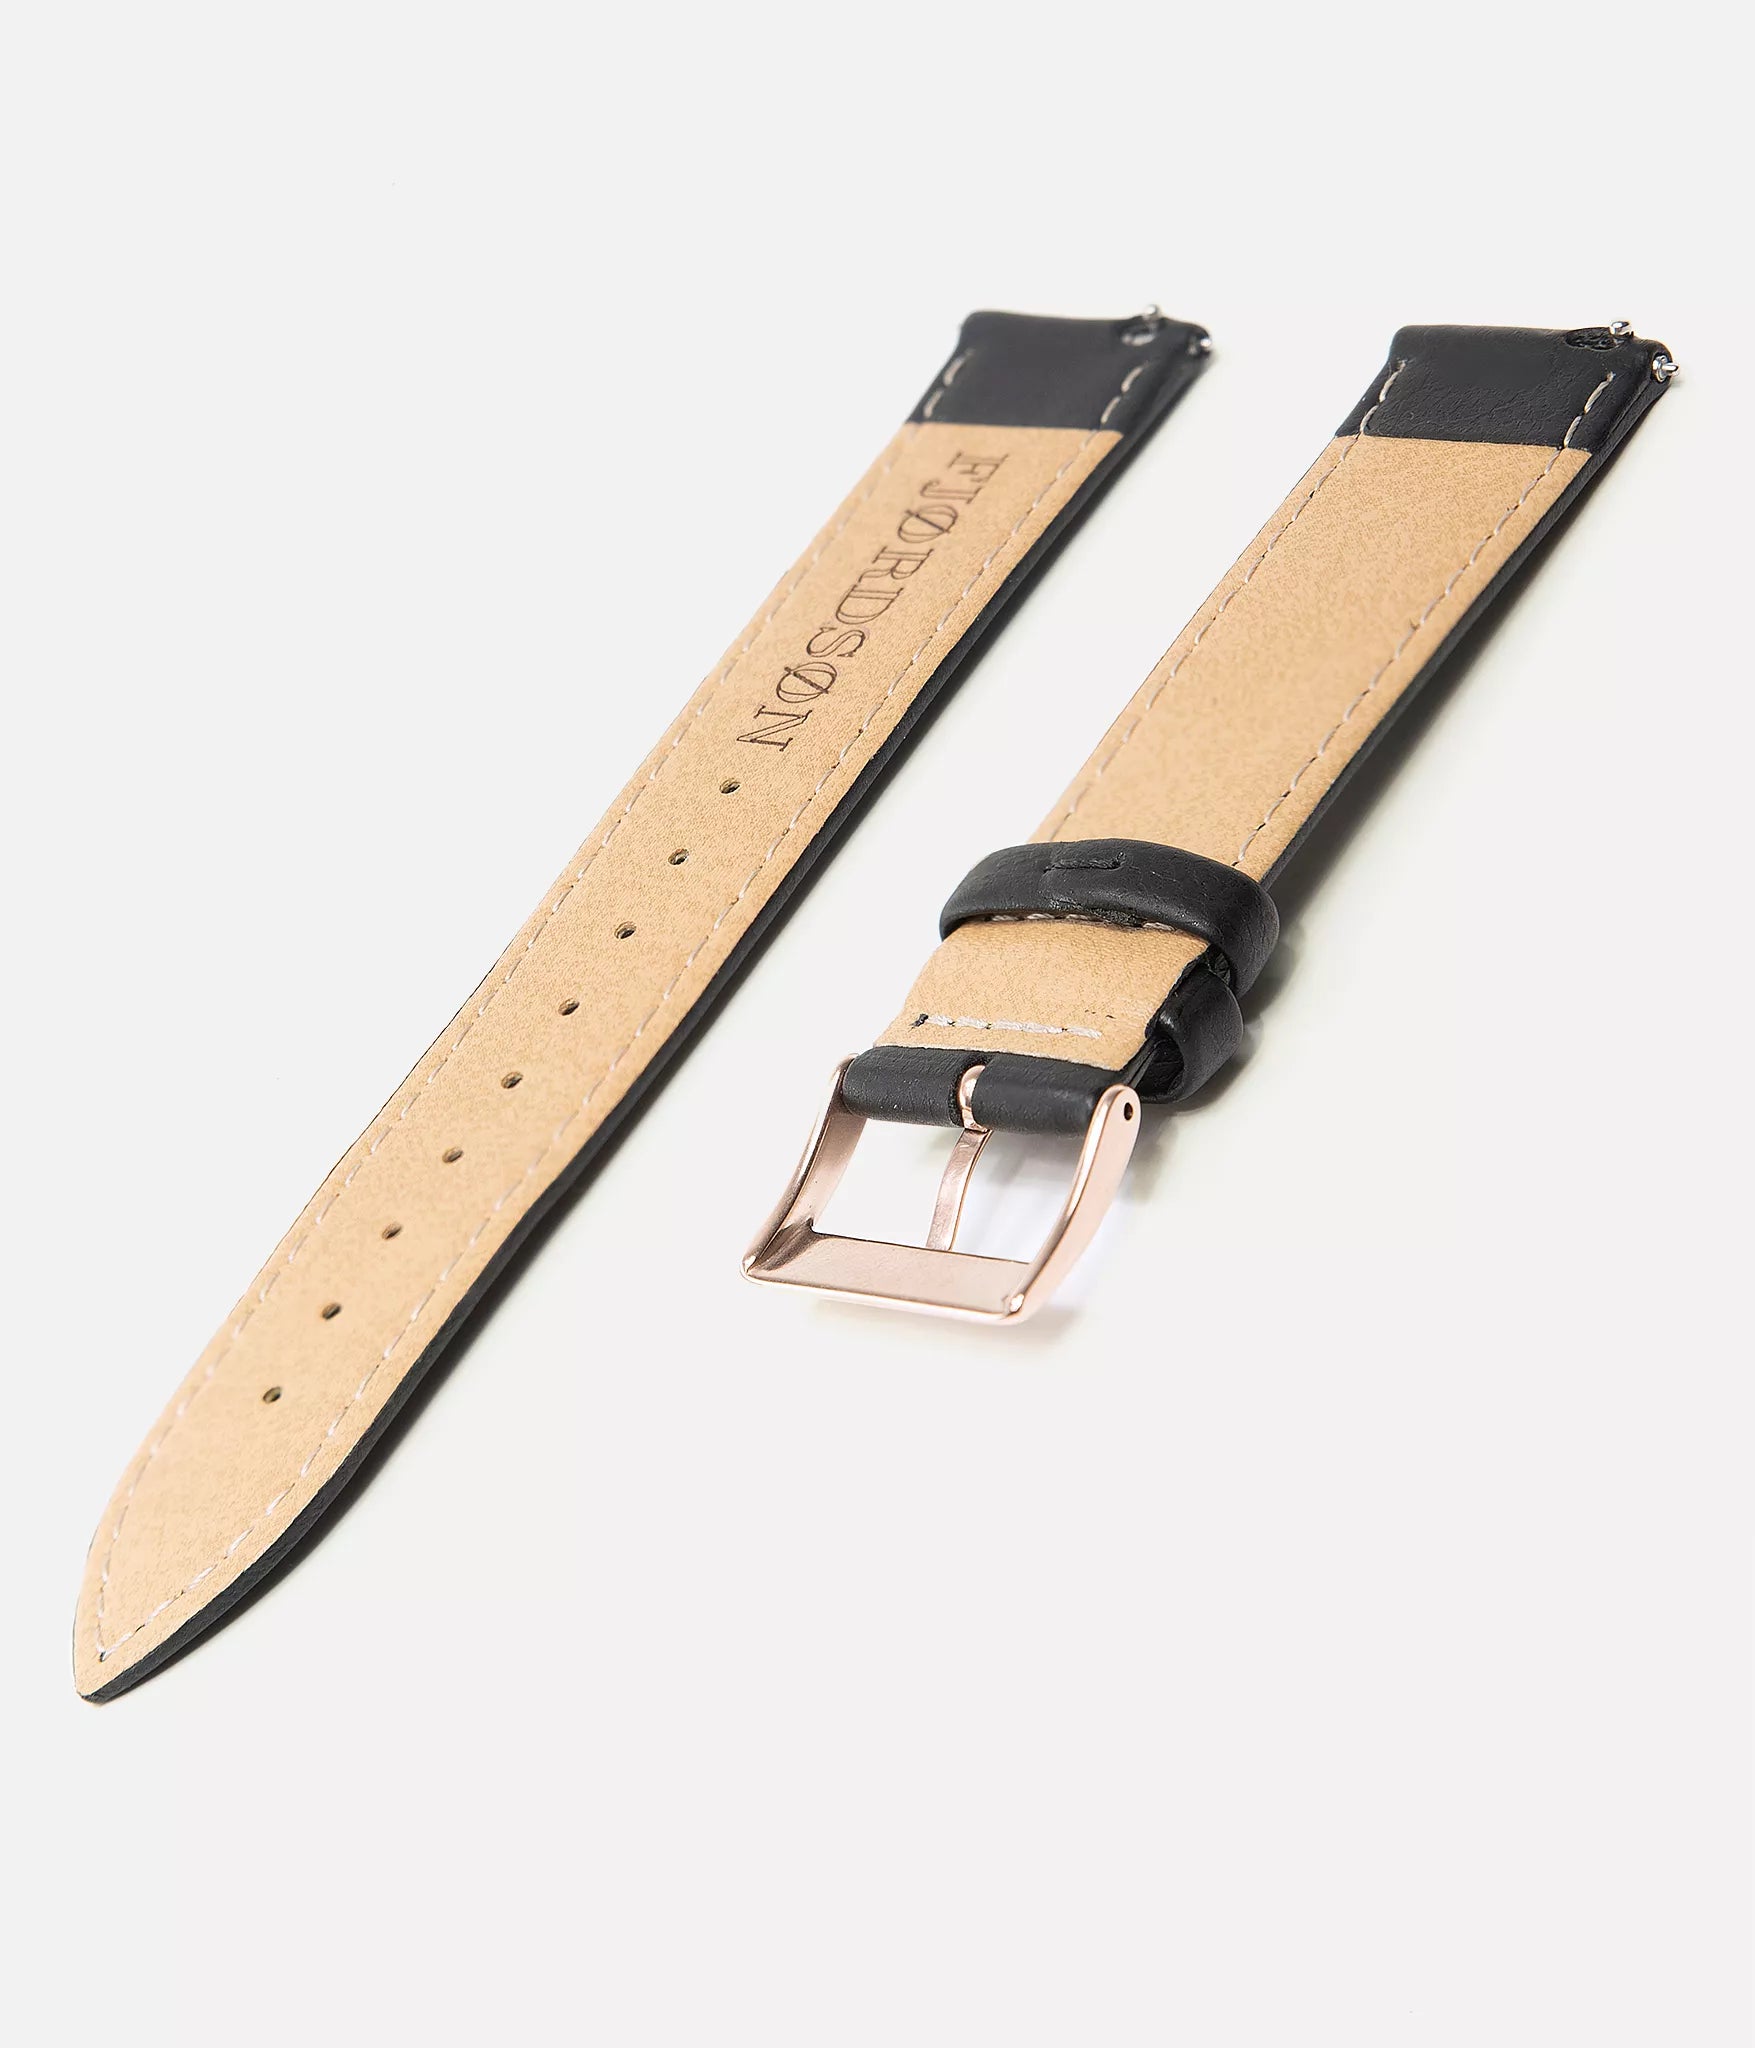 Watch strap back shot - Fjordson watch with black dial and black vegan leather watch strap - UNISEX - vegan & approved by PETA - Swiss made